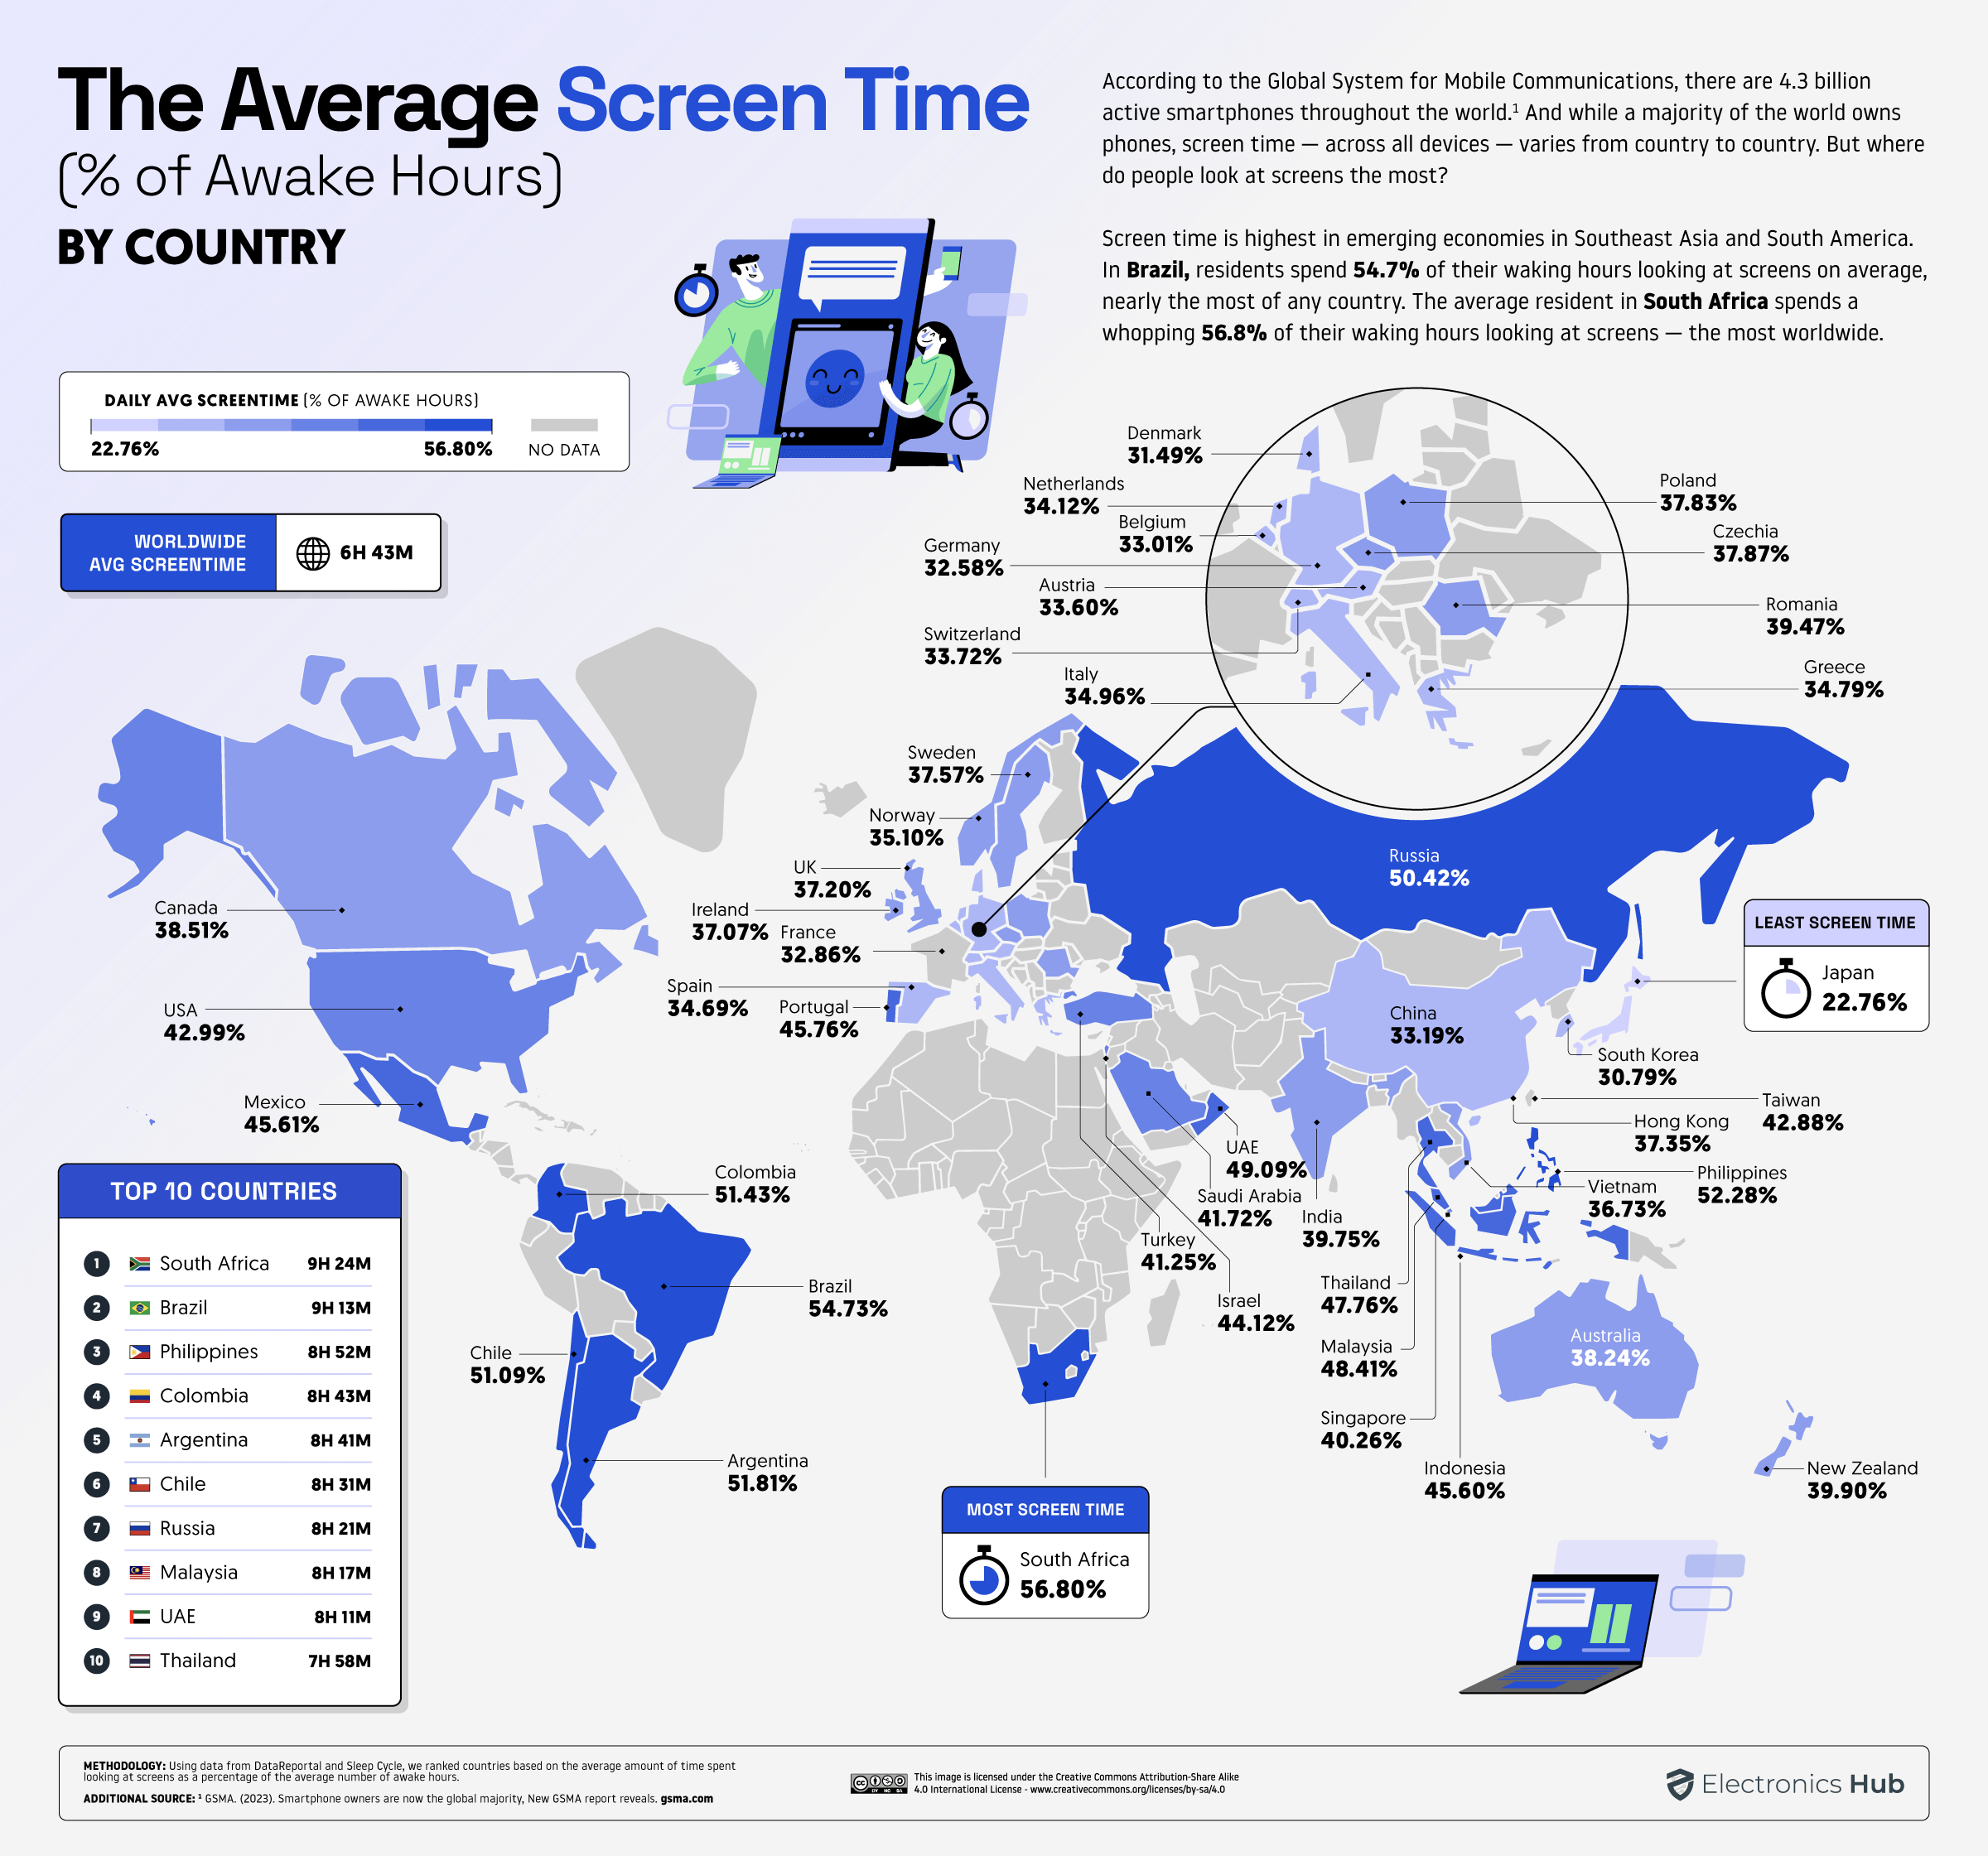 M'sians ranked 8th in the world for screen time usage, spend 48. 41% of waking hours on devices | weirdkaya